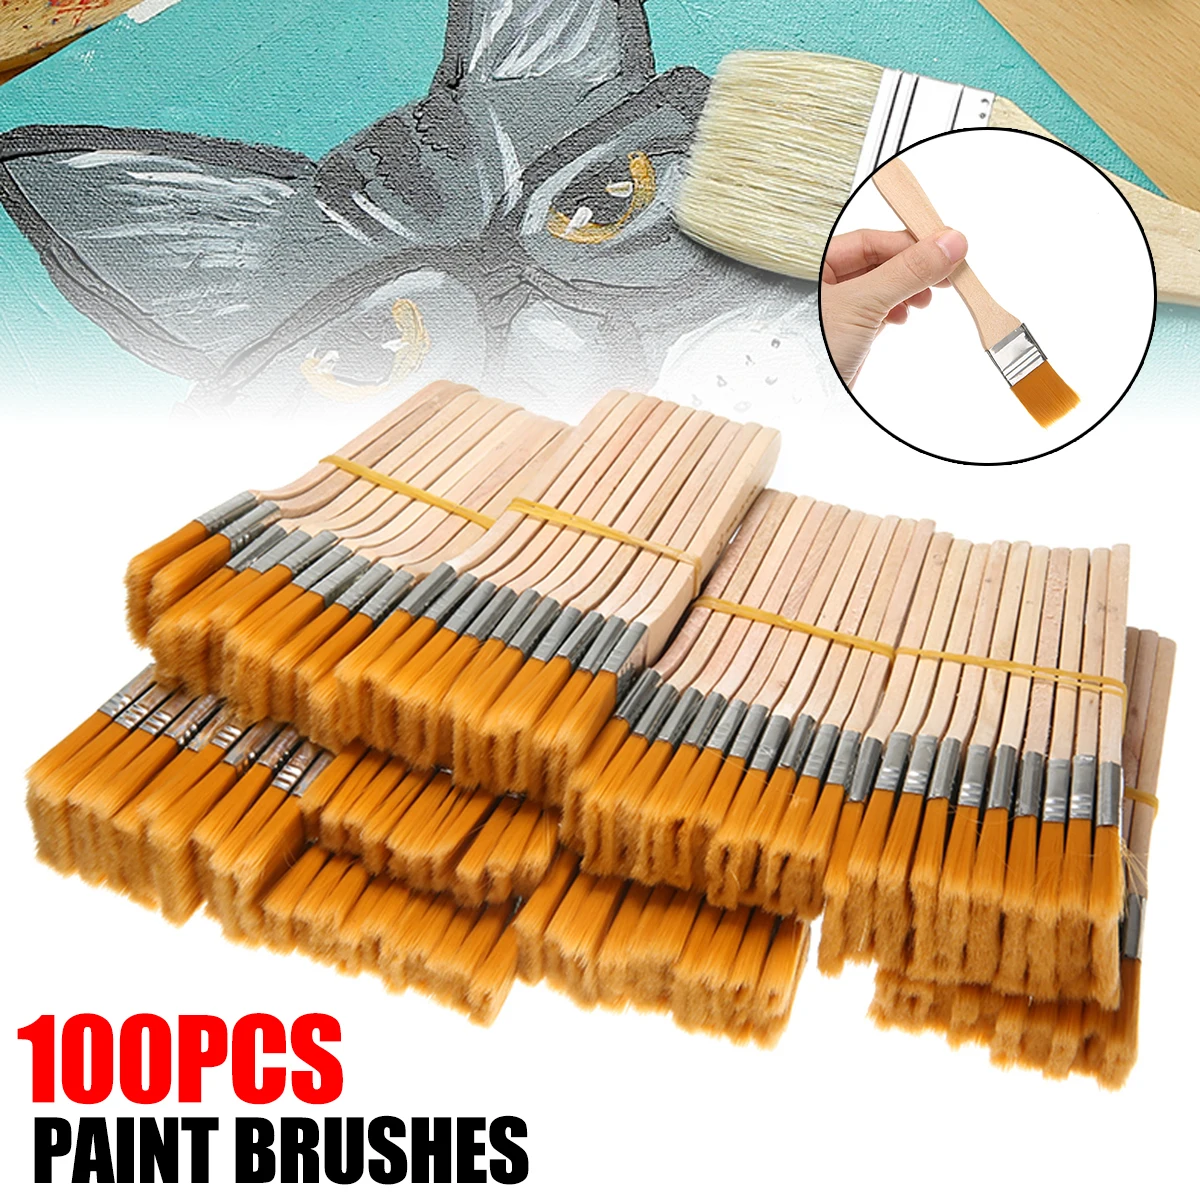 100pcs Nylon Paint Brush Different Size Wooden Handle Oil Painting Drawing Brushes for Acrylic Oil Painting School Art Supplies